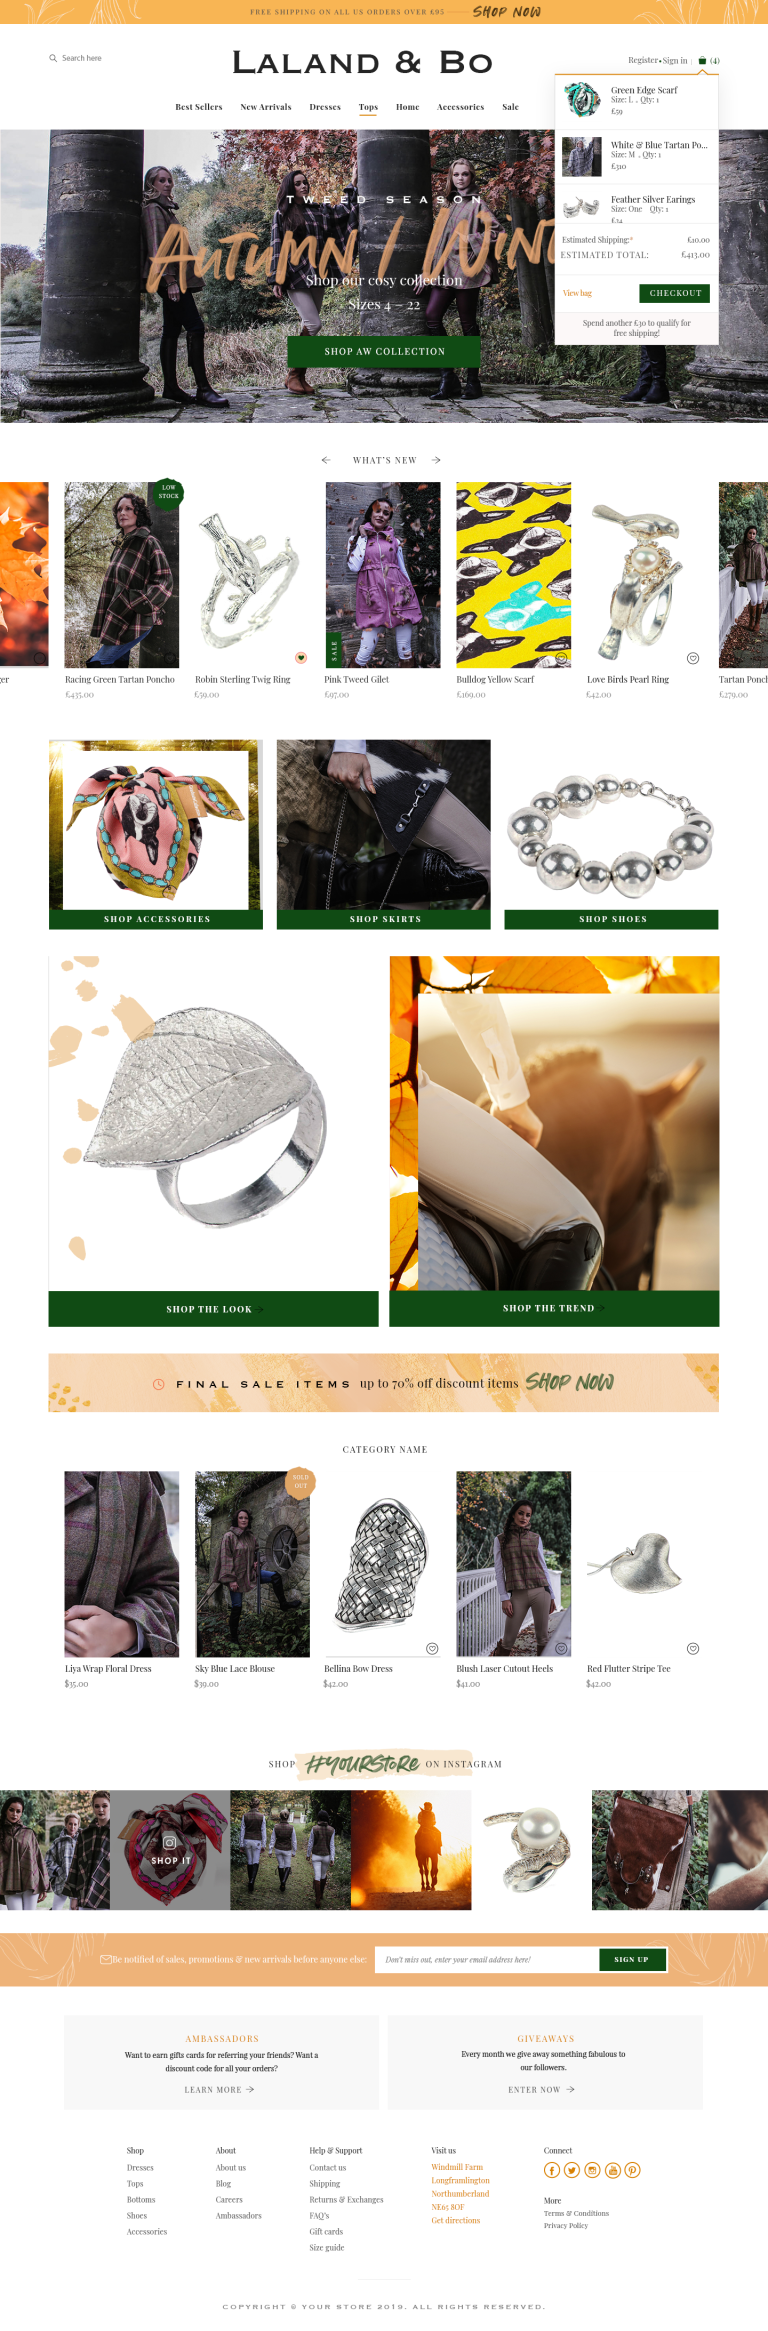 Laland and Bo Equestrian Jewellery and Fashion Content Photography Session. Website Mock-Up